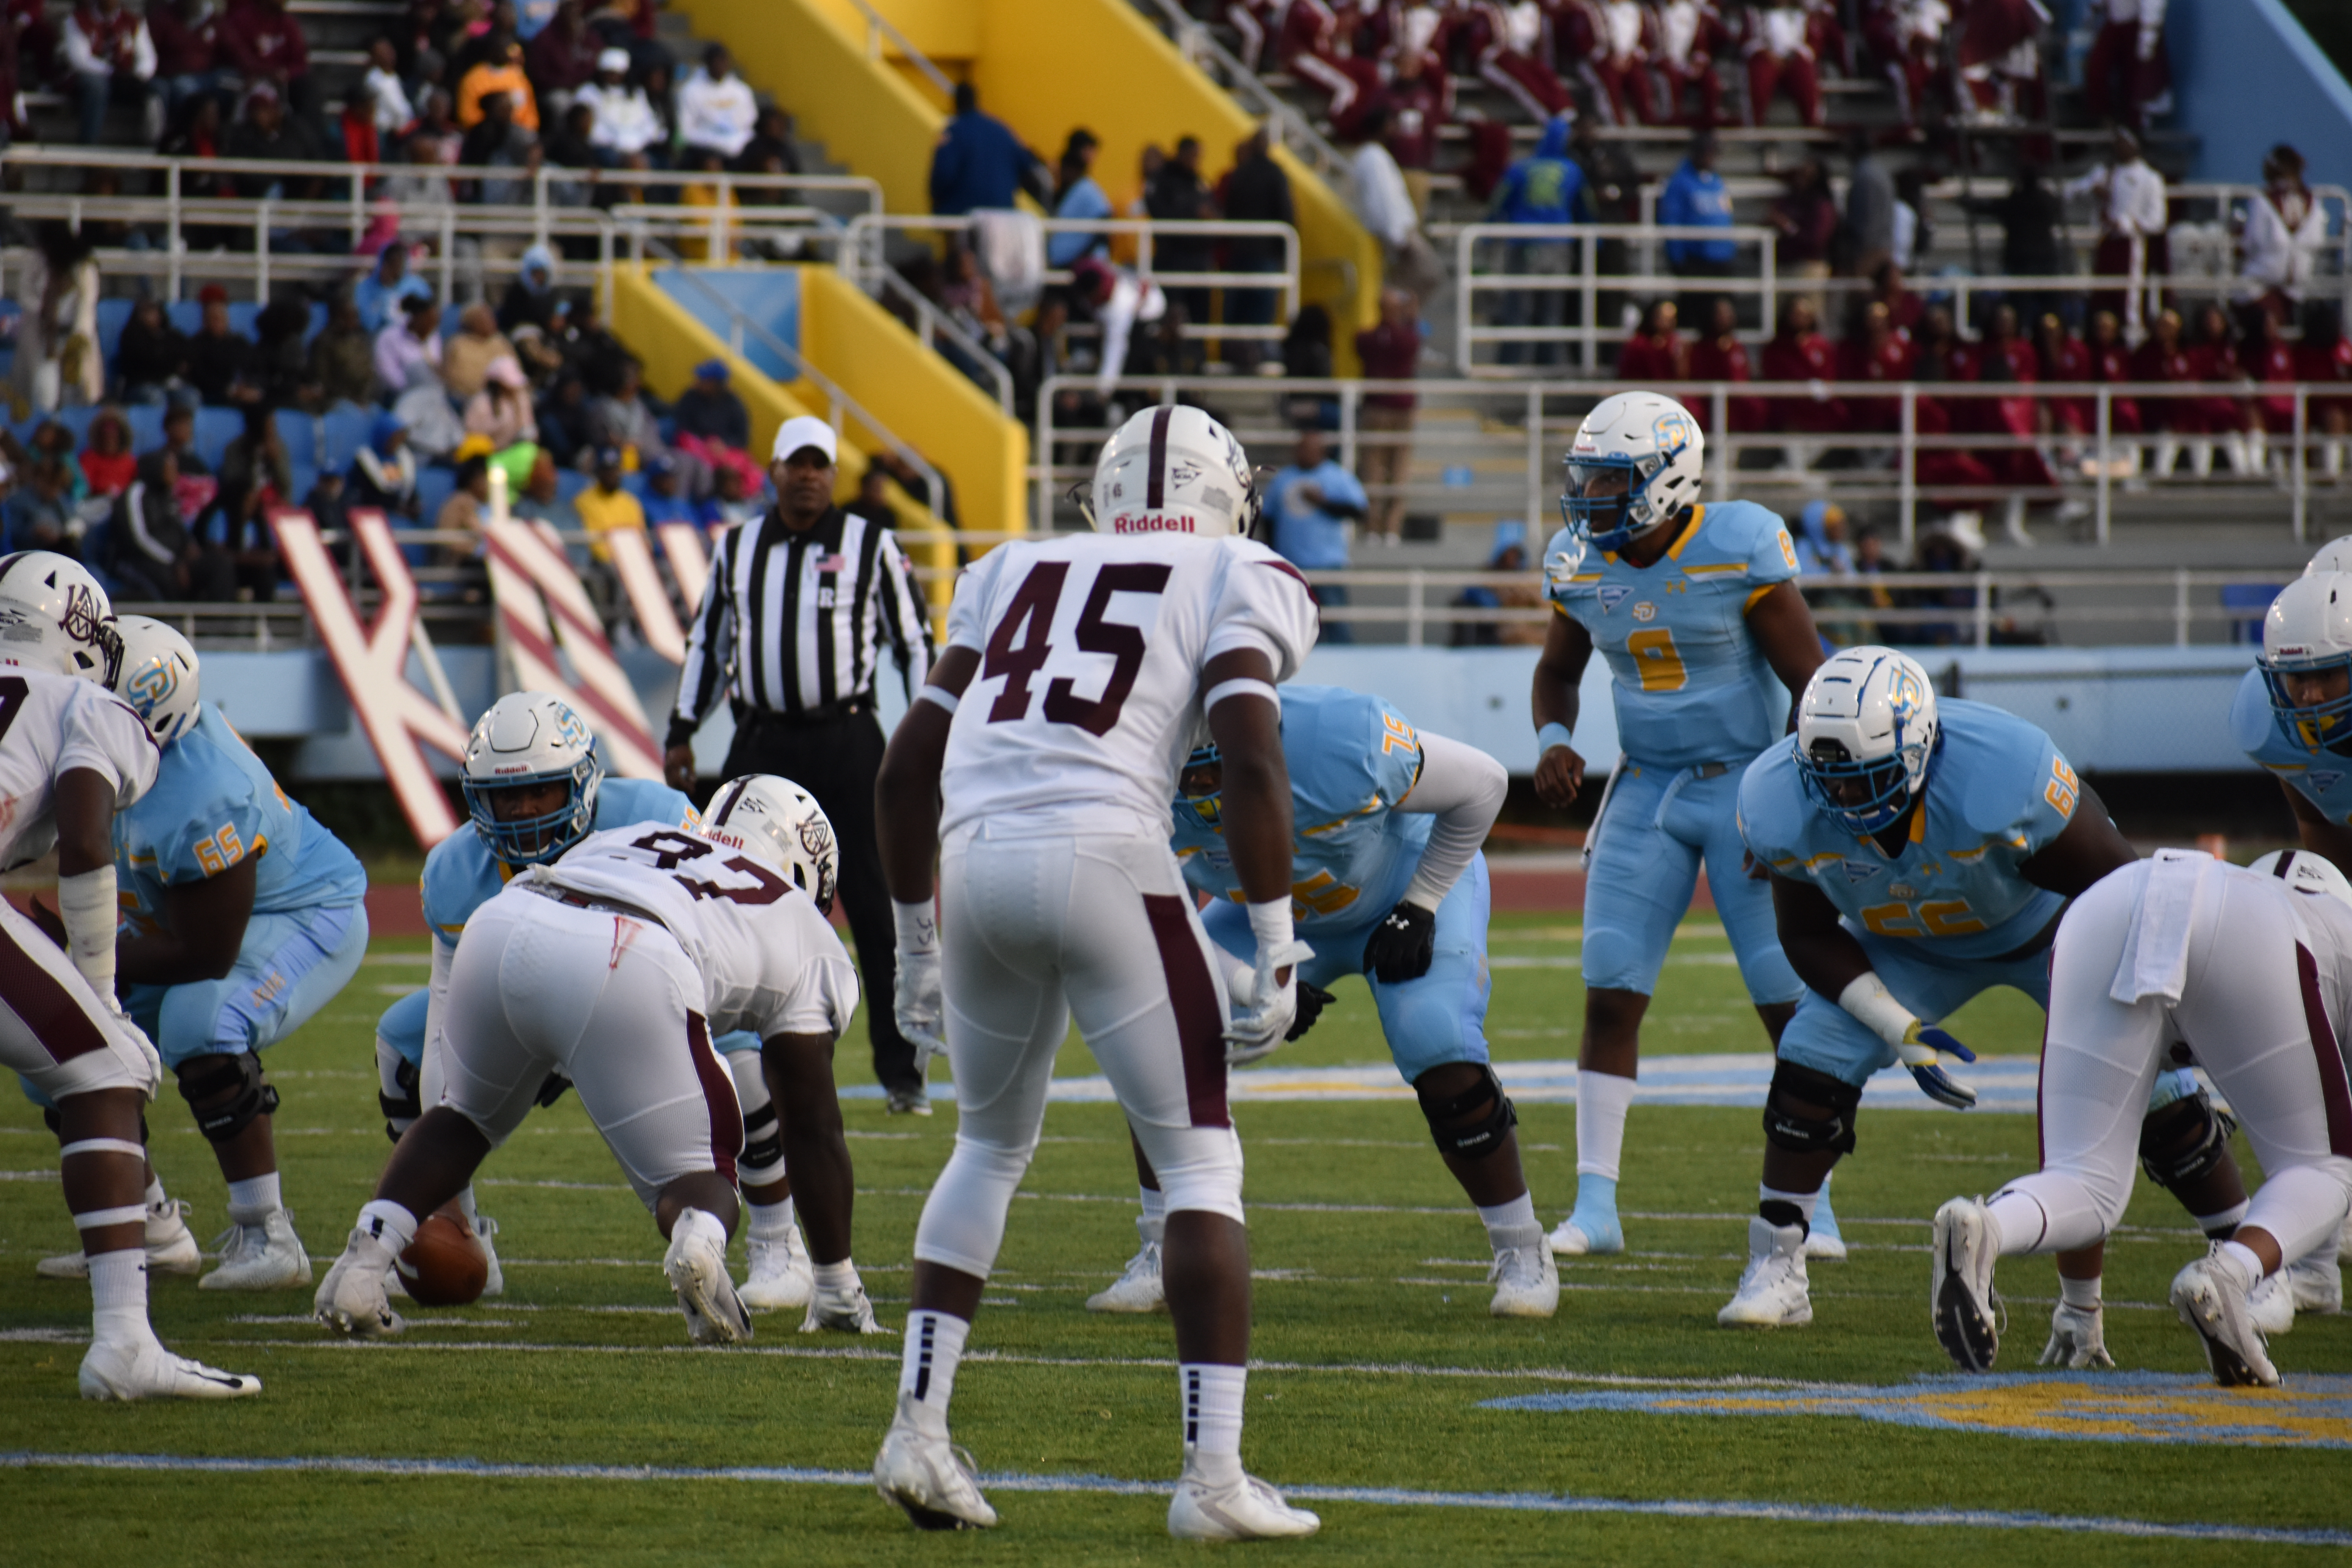 Southern University Continues to Protect the Bluff with 35-31 Victory Over Alabama A&M